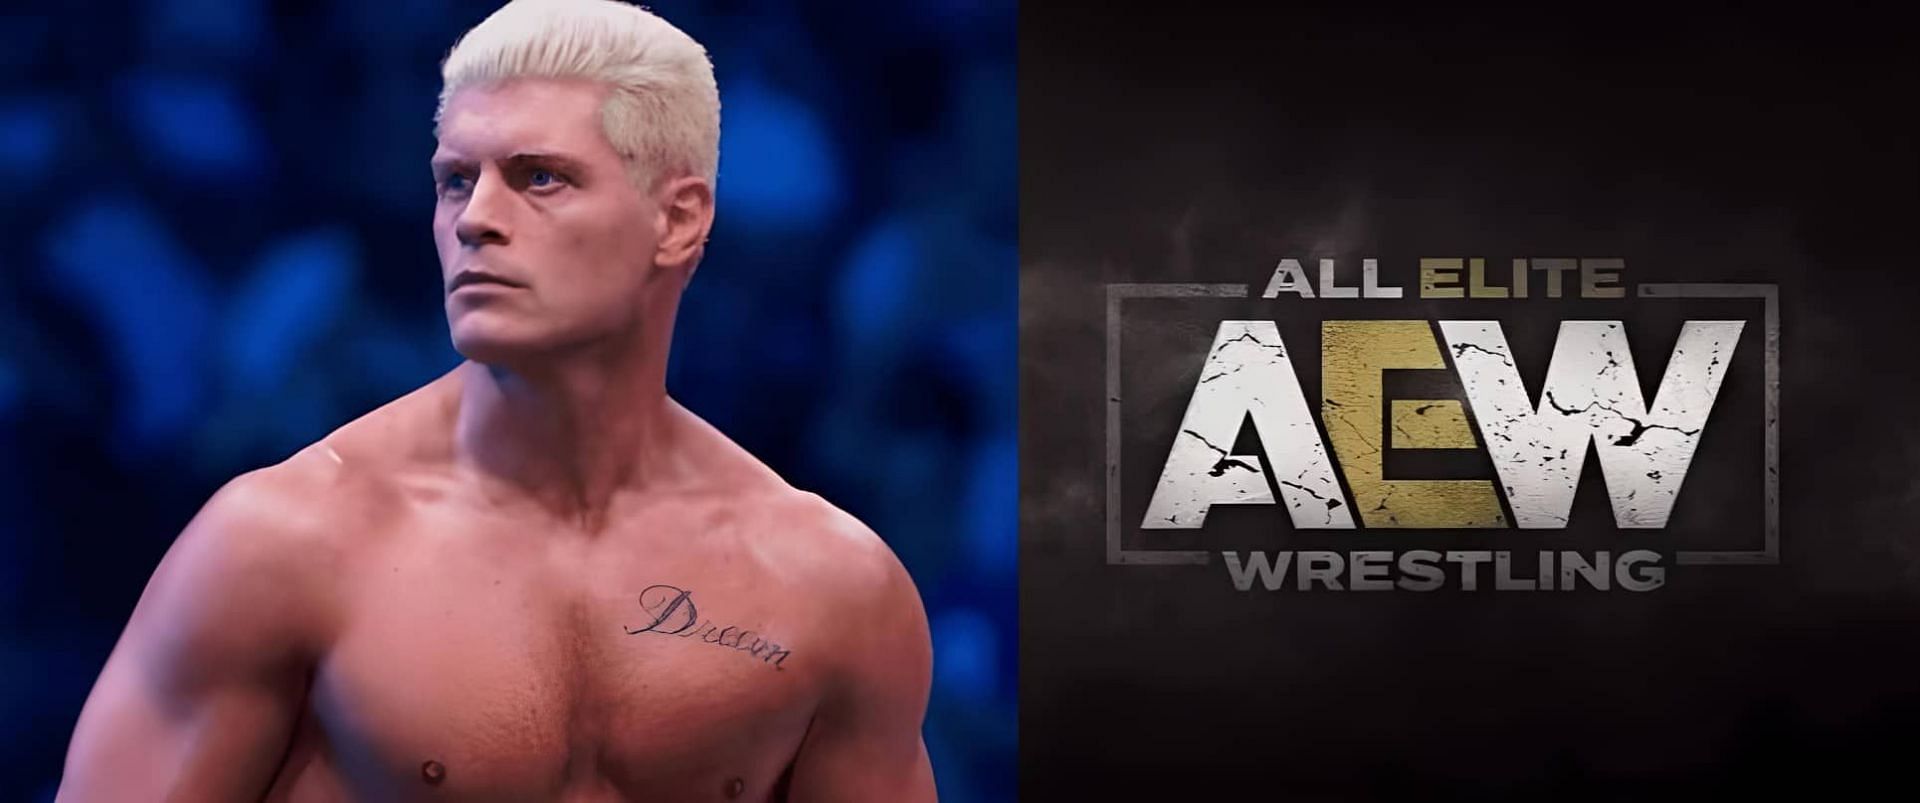 Cody Rhodes is still a mentor for some AEW talents